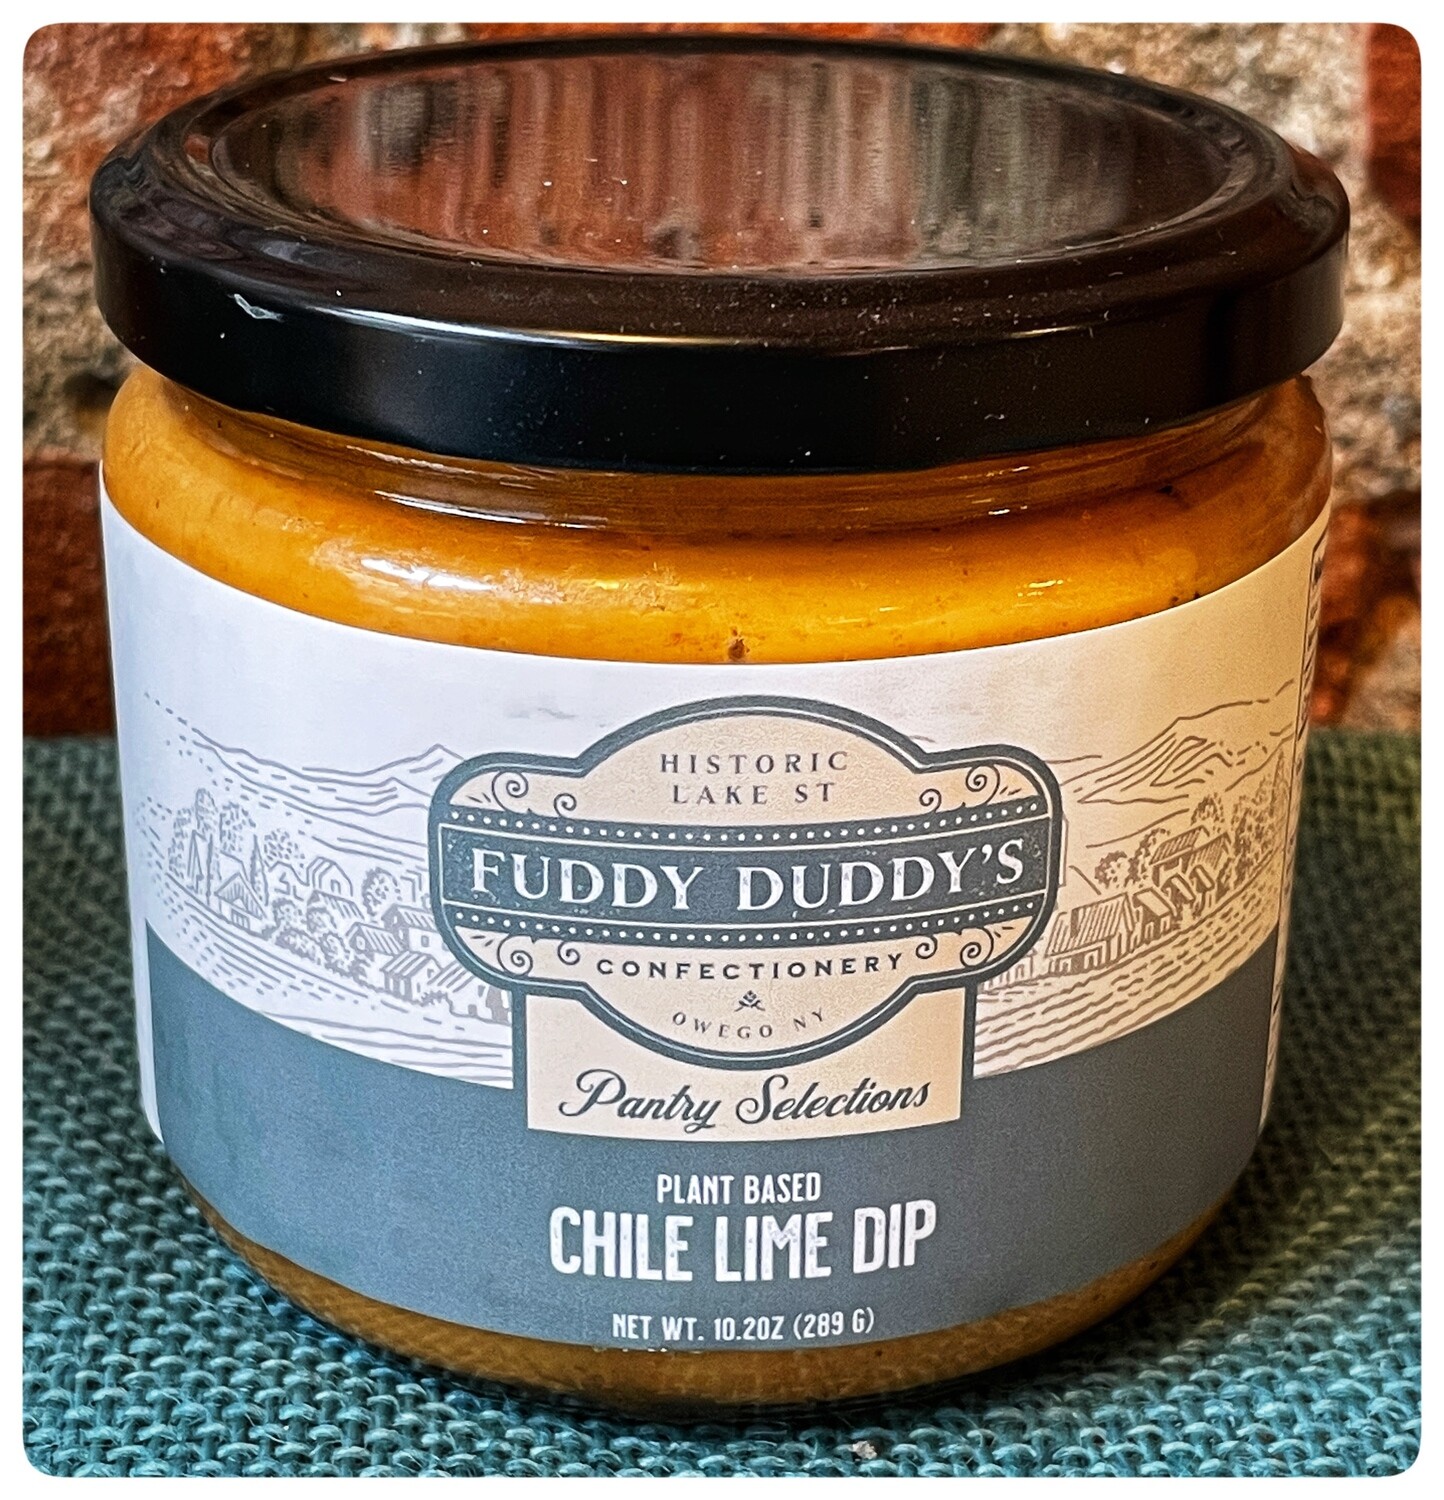 Fuddy Duddy's Chile Lime Dip